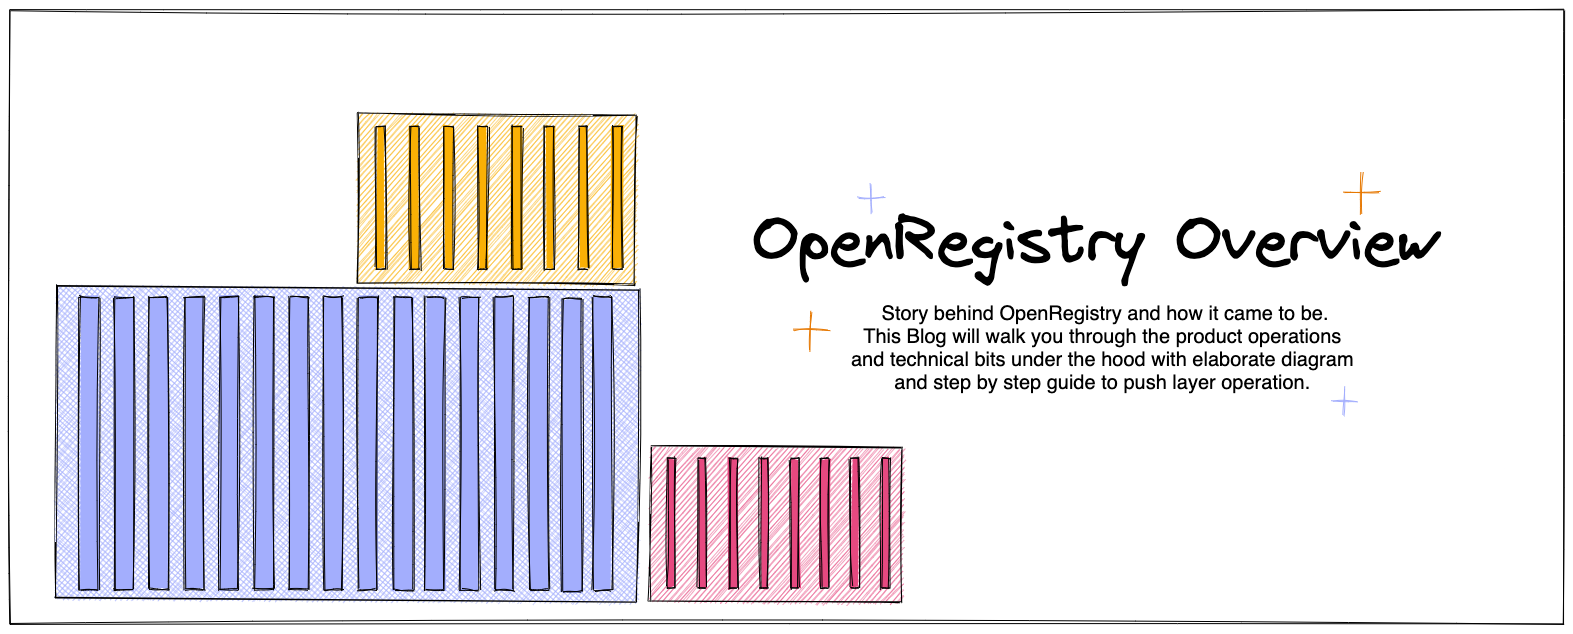 openregistry-overview